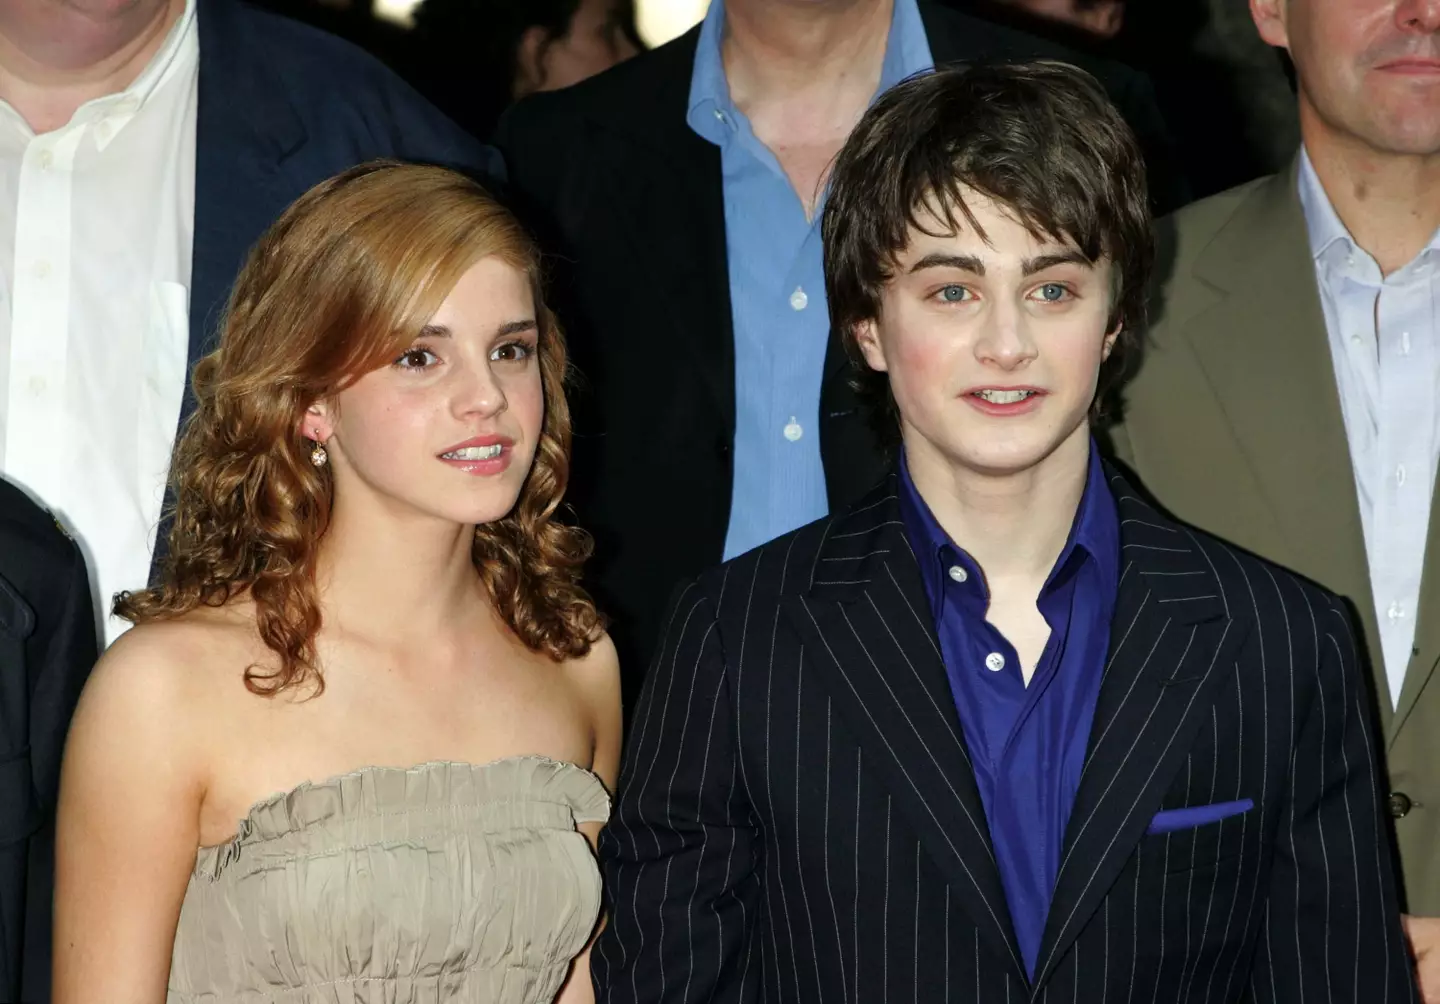 The pair played Hermione and Harry (Jim Spellman/WireImage/Getty Images)